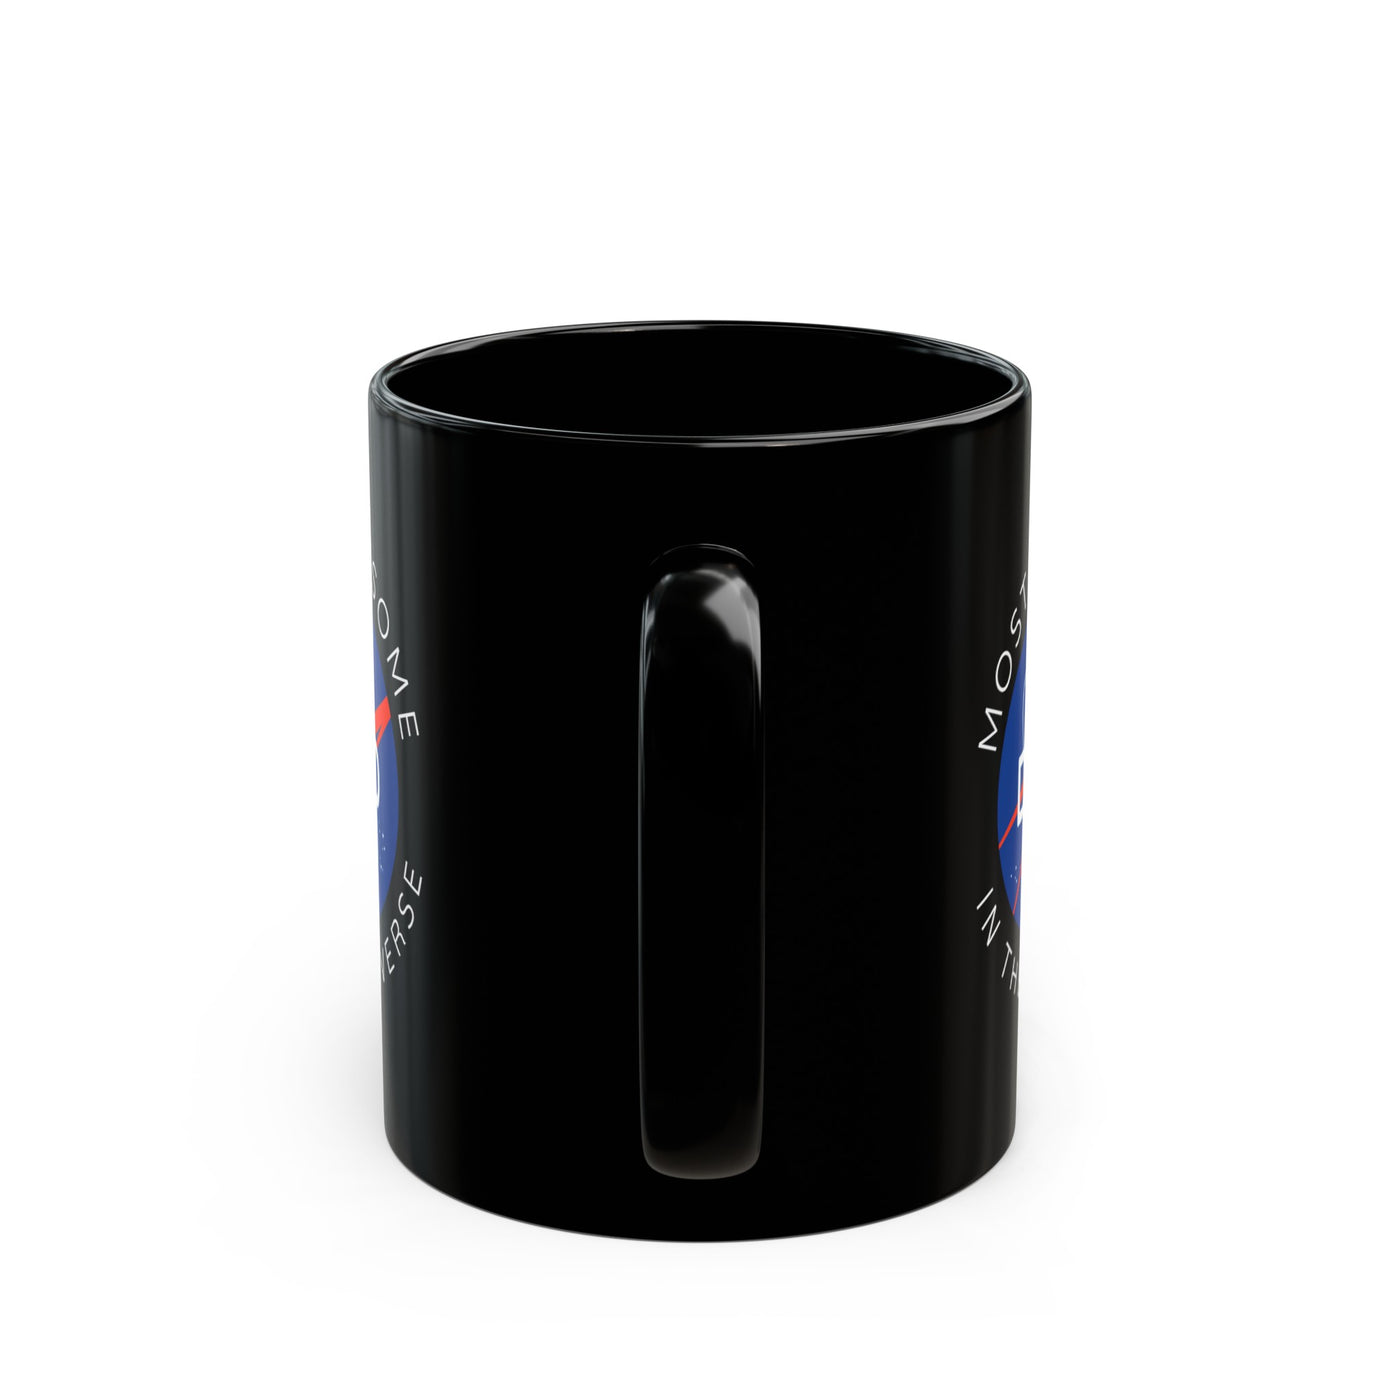 Most Awesome DAD in the Universe - 11oz Black Mug